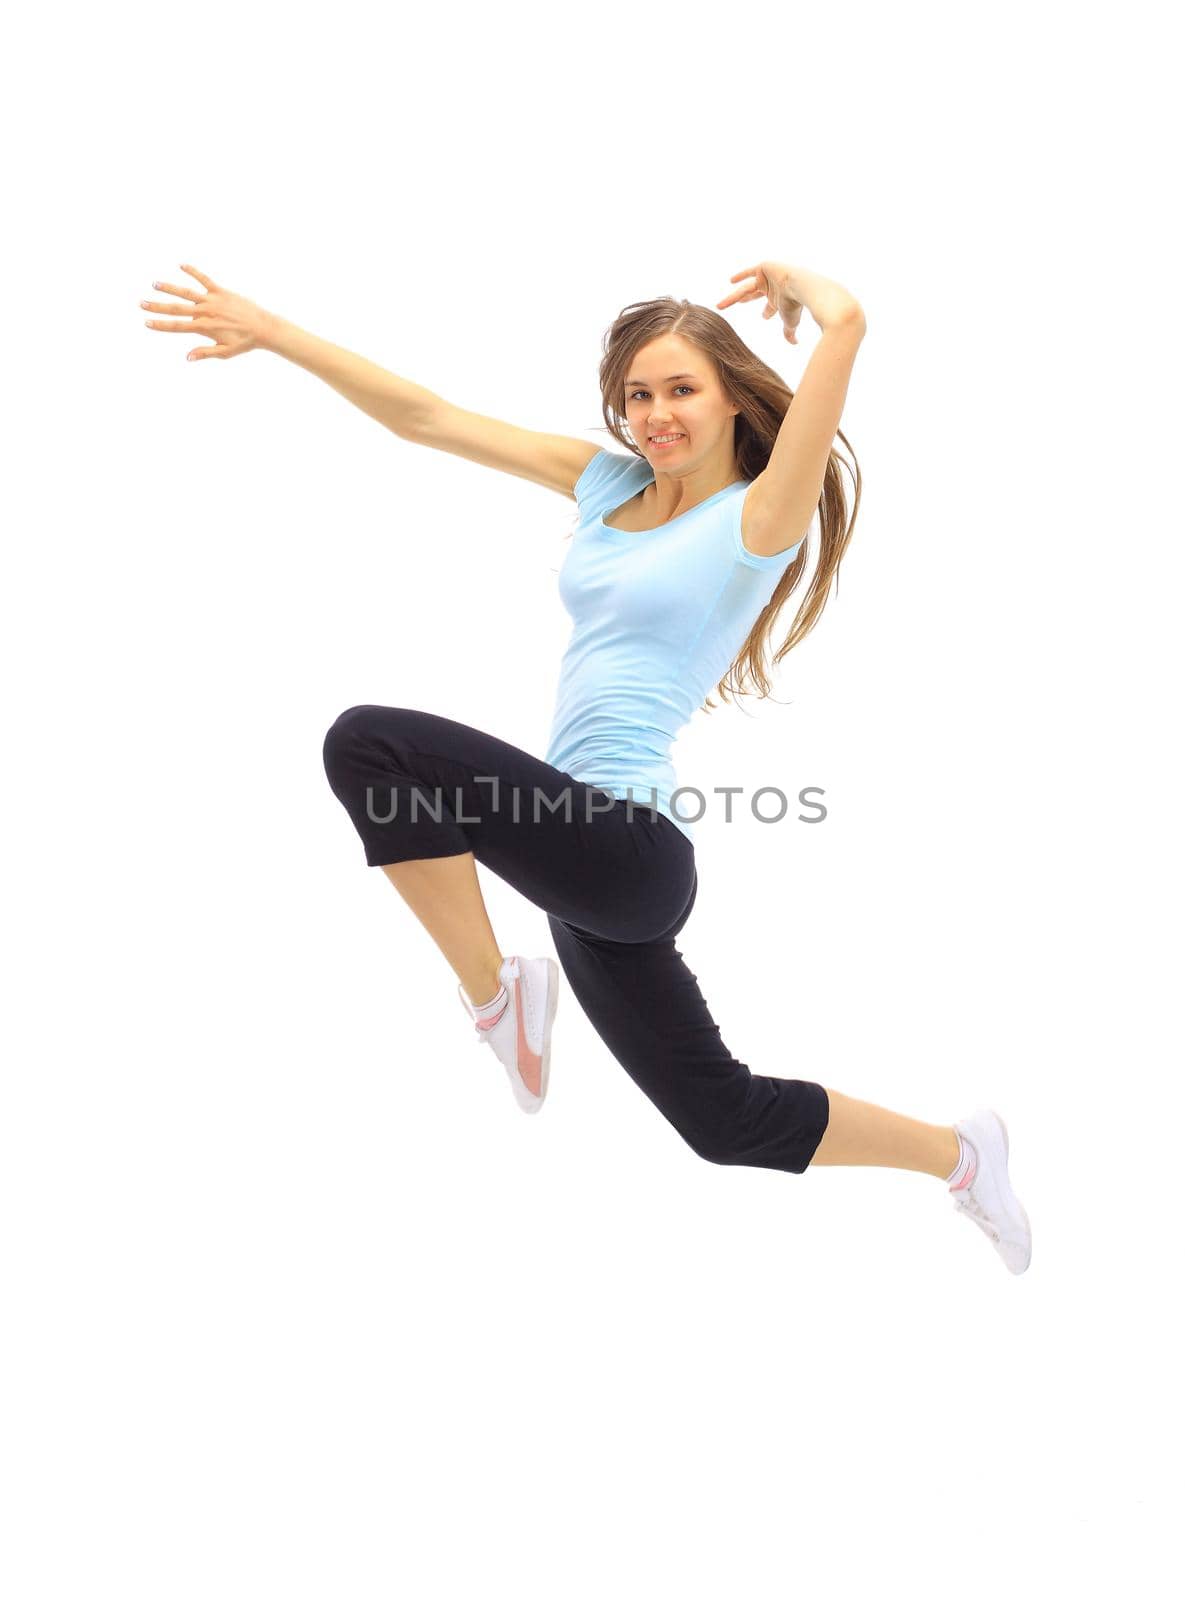 The beautiful young woman plays sports on a white background by SmartPhotoLab